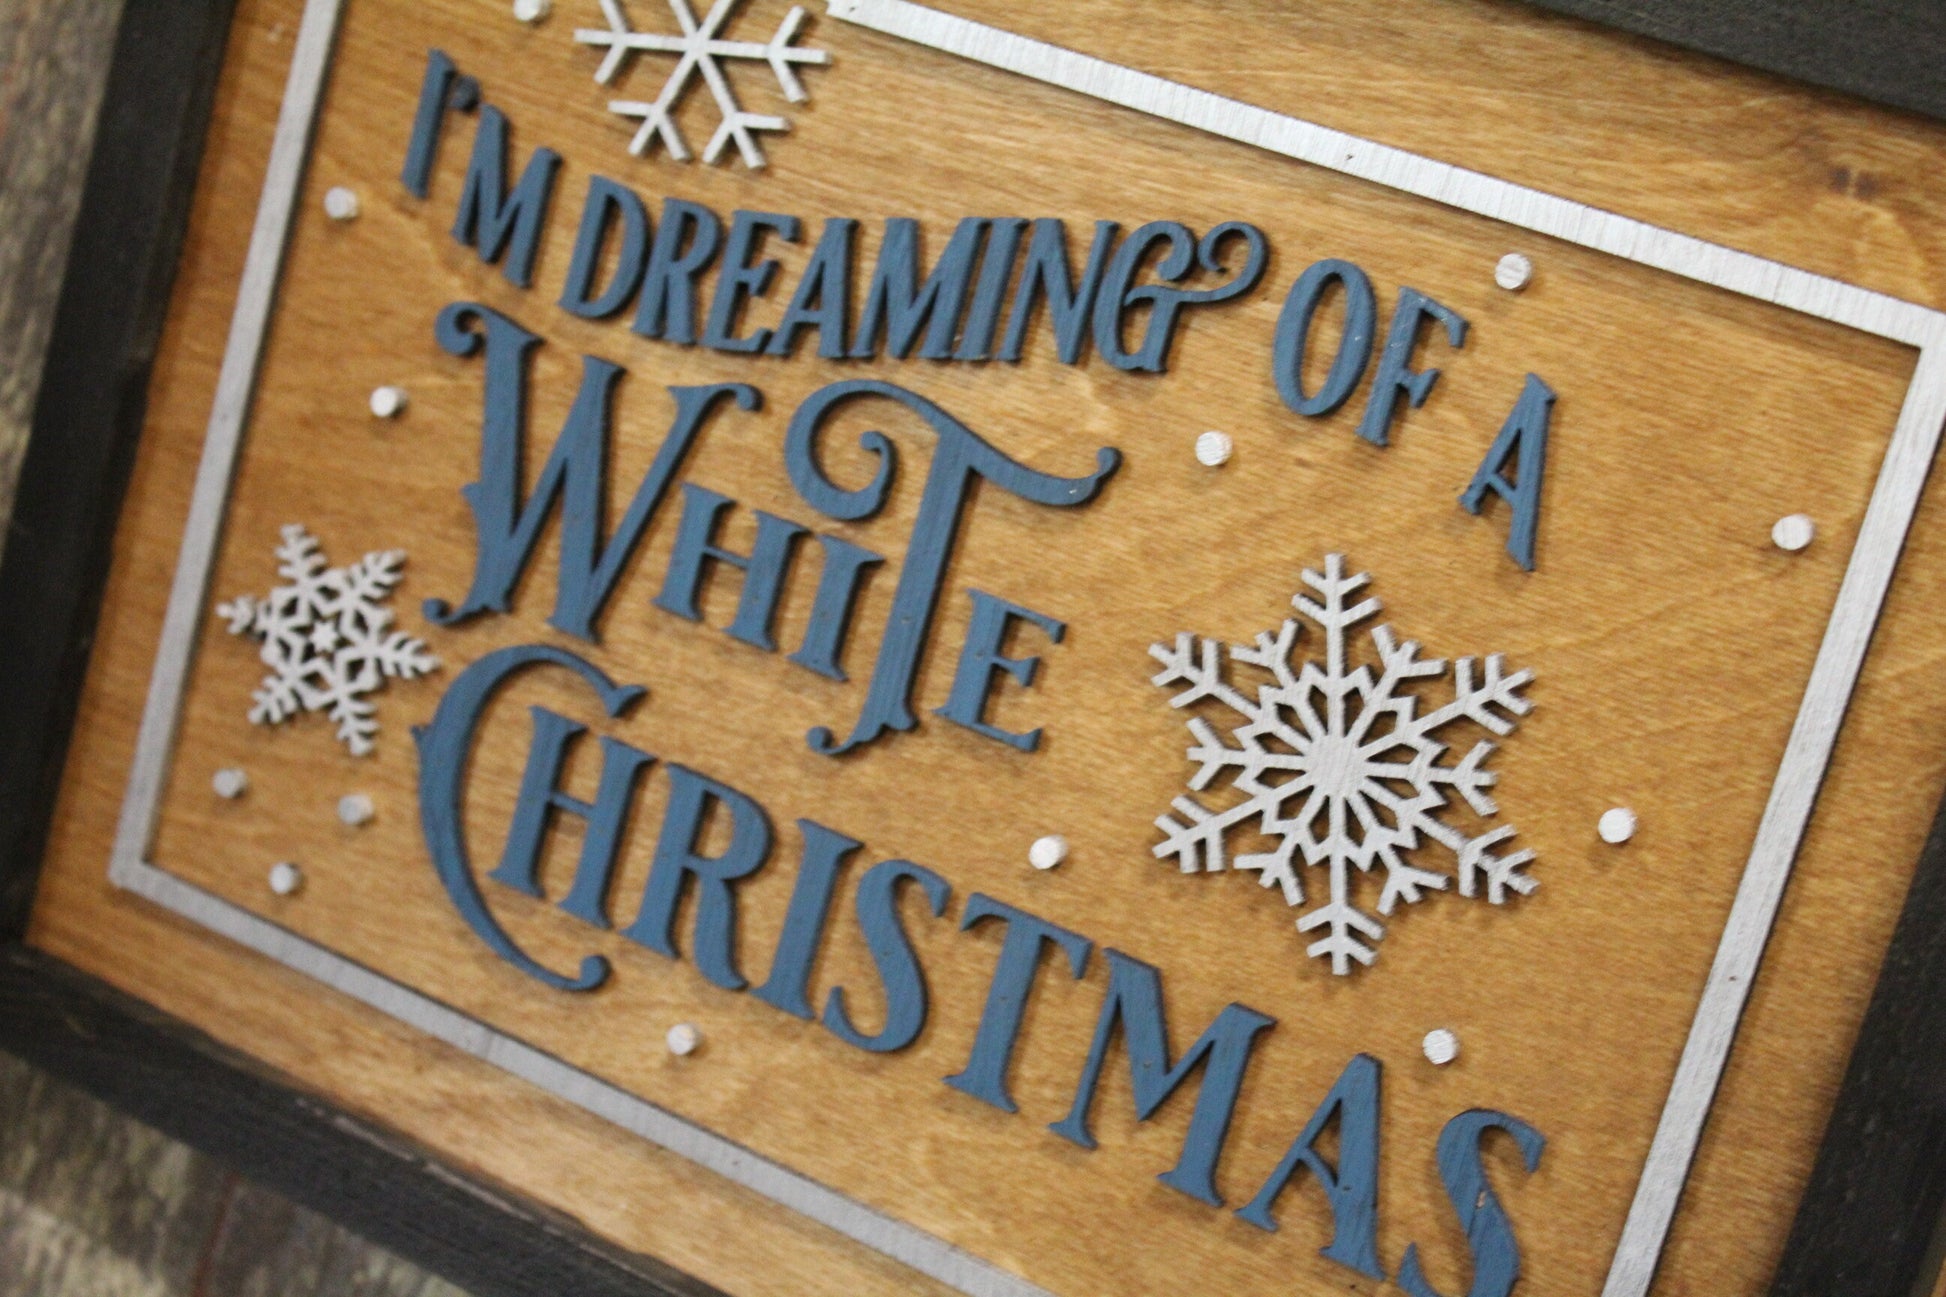 I'm Dreaming of a White Christmas Wood Sign Decoration Winter 3D Raised Text Country Farmhouse Cabin Decor Snowflake Merry Nostalgic Vintage